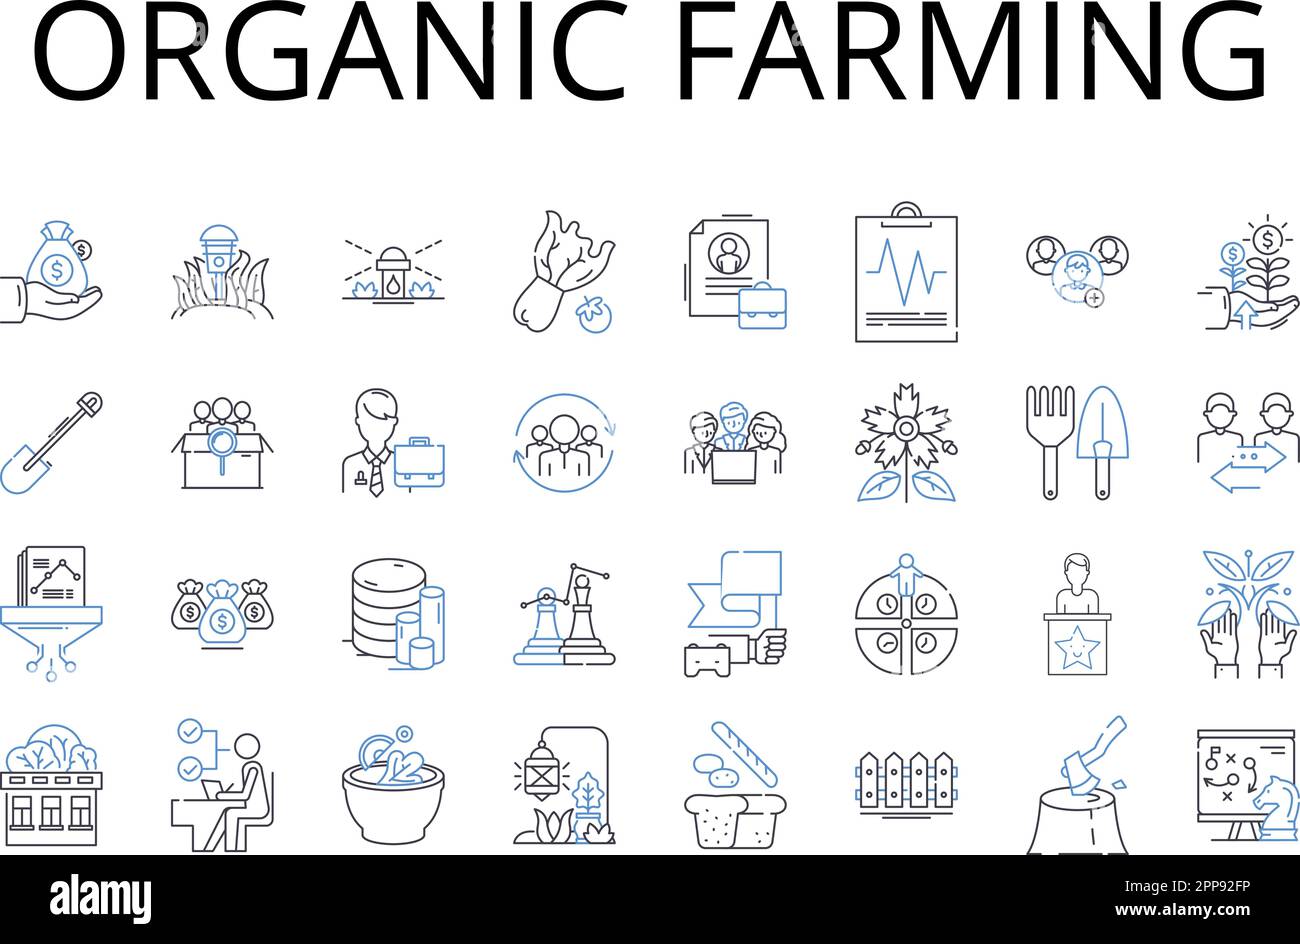 Organic farming line icons collection. Renewable Energy, Sustainable Living, Eco-Friendly, Natural Medicine, Biodegradable Packaging, Fair Trade Stock Vector